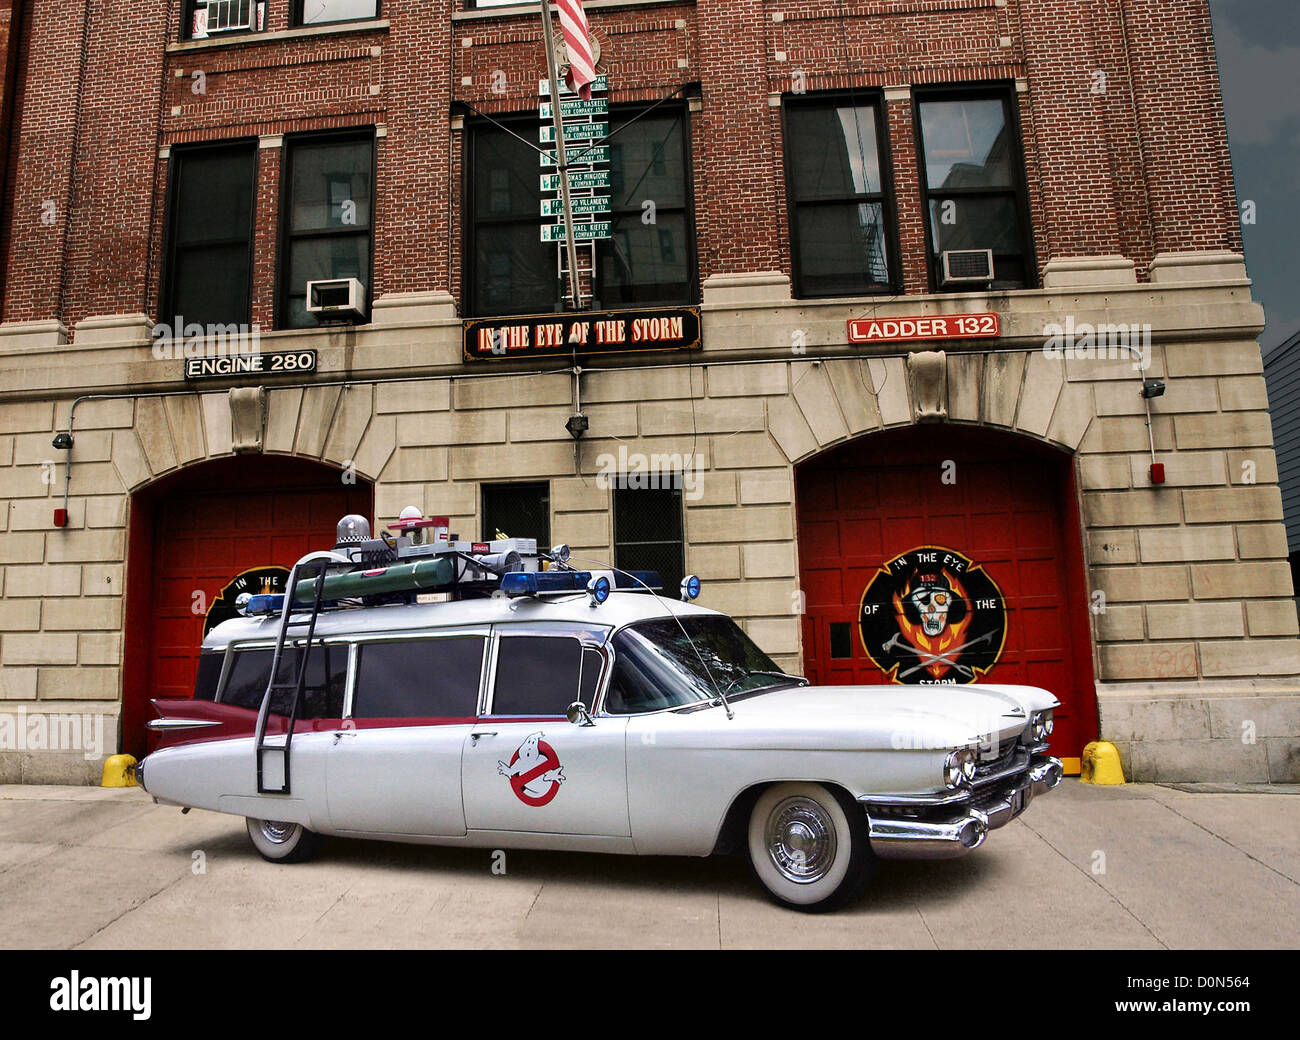 CADILLAC-REINCARNATED-AS-GHOSTBUSTERS-EC